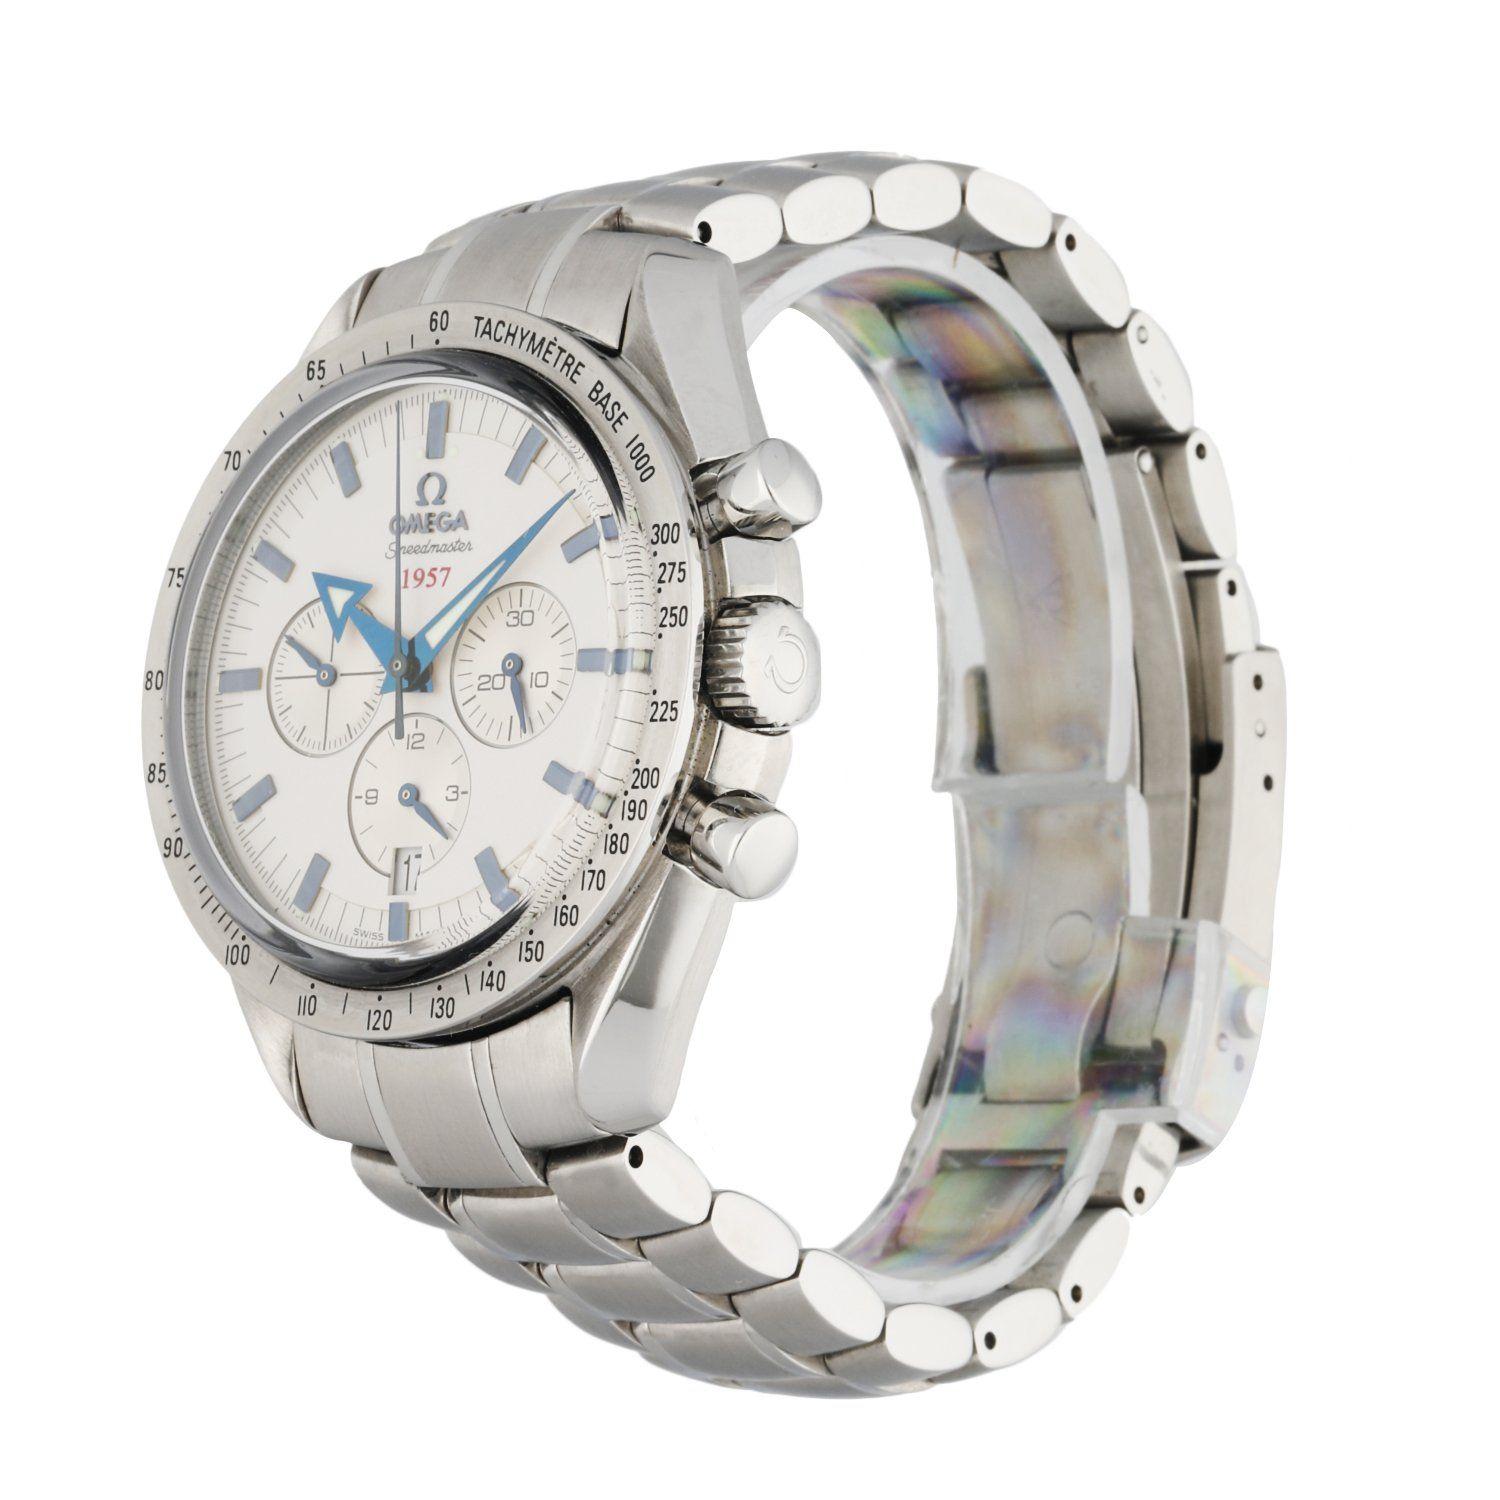 Omega Speedmaster 321.12.42.50.02.001 men's watch. 42MM stainless steel case with stationary tachymeter bezel. White dial with luminous blue hands and blue index hour marker. Subdial function :small second, minutes and 12 hour register. Date display